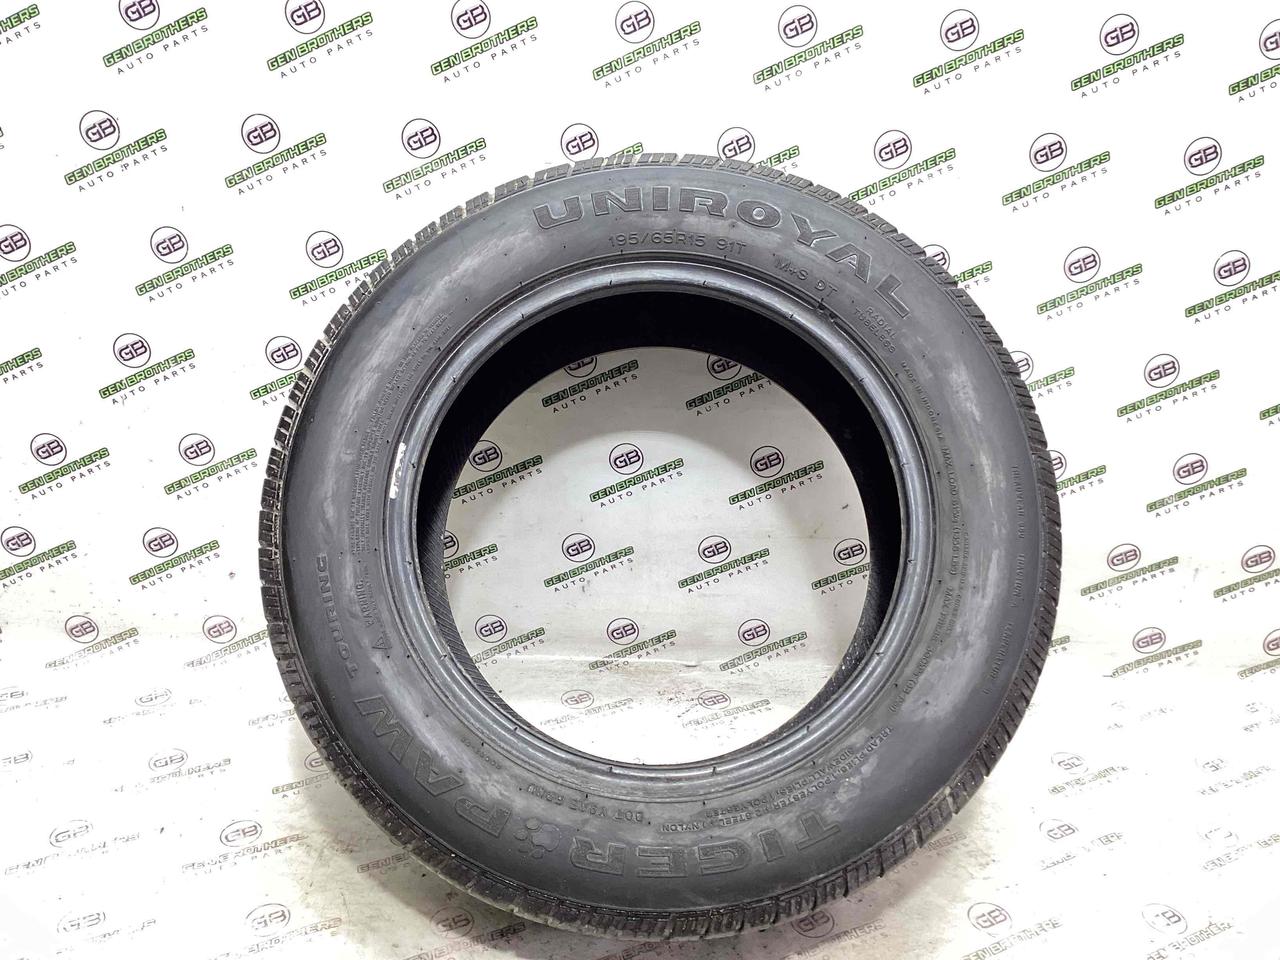 Шини, гума, покришки Uniroyal Tiger Paw Touring 195/65R15 91T